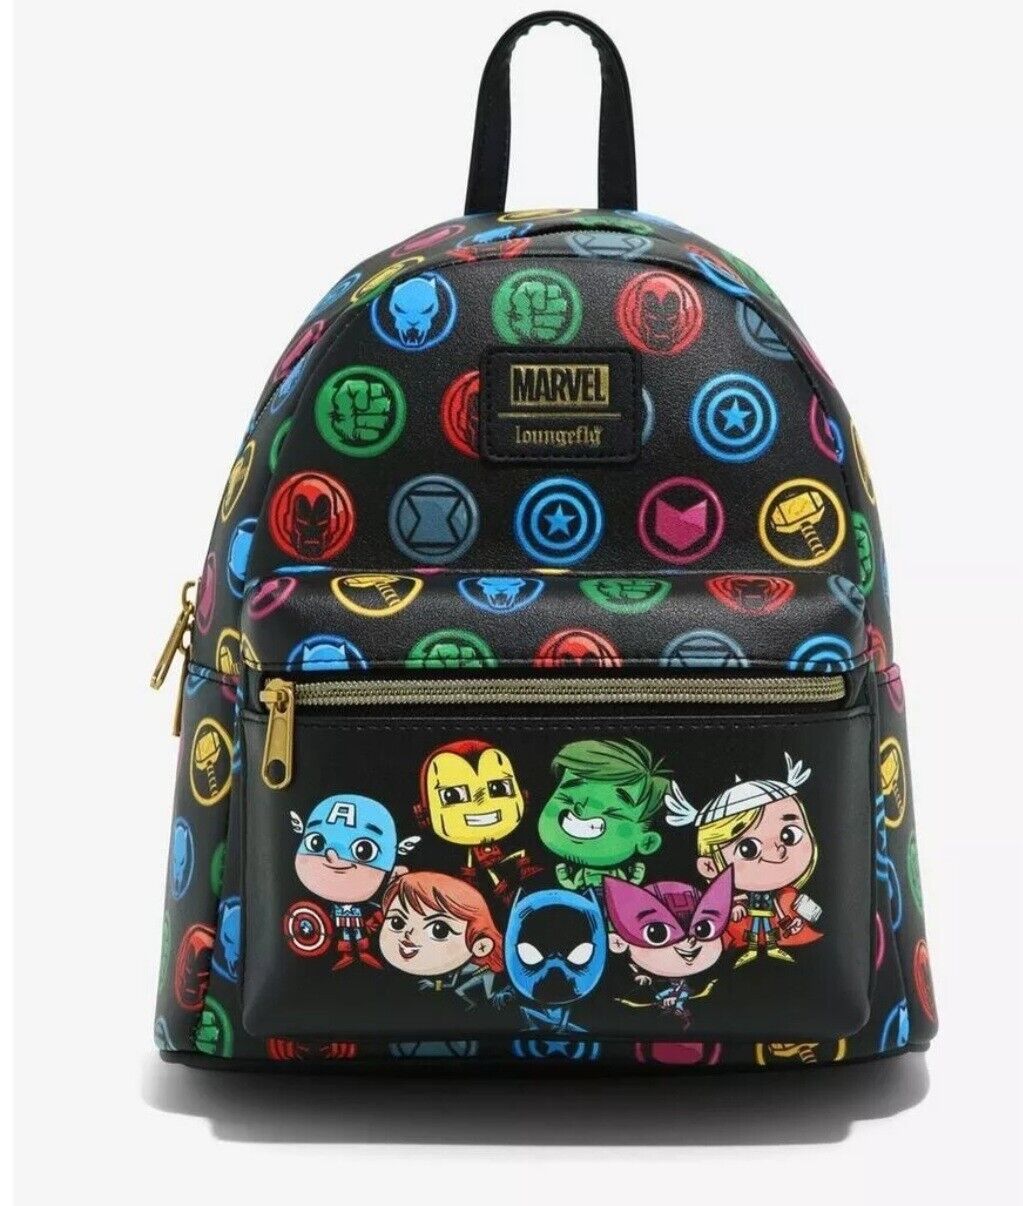 Loungefly Marvel Backpack Shipping Included 